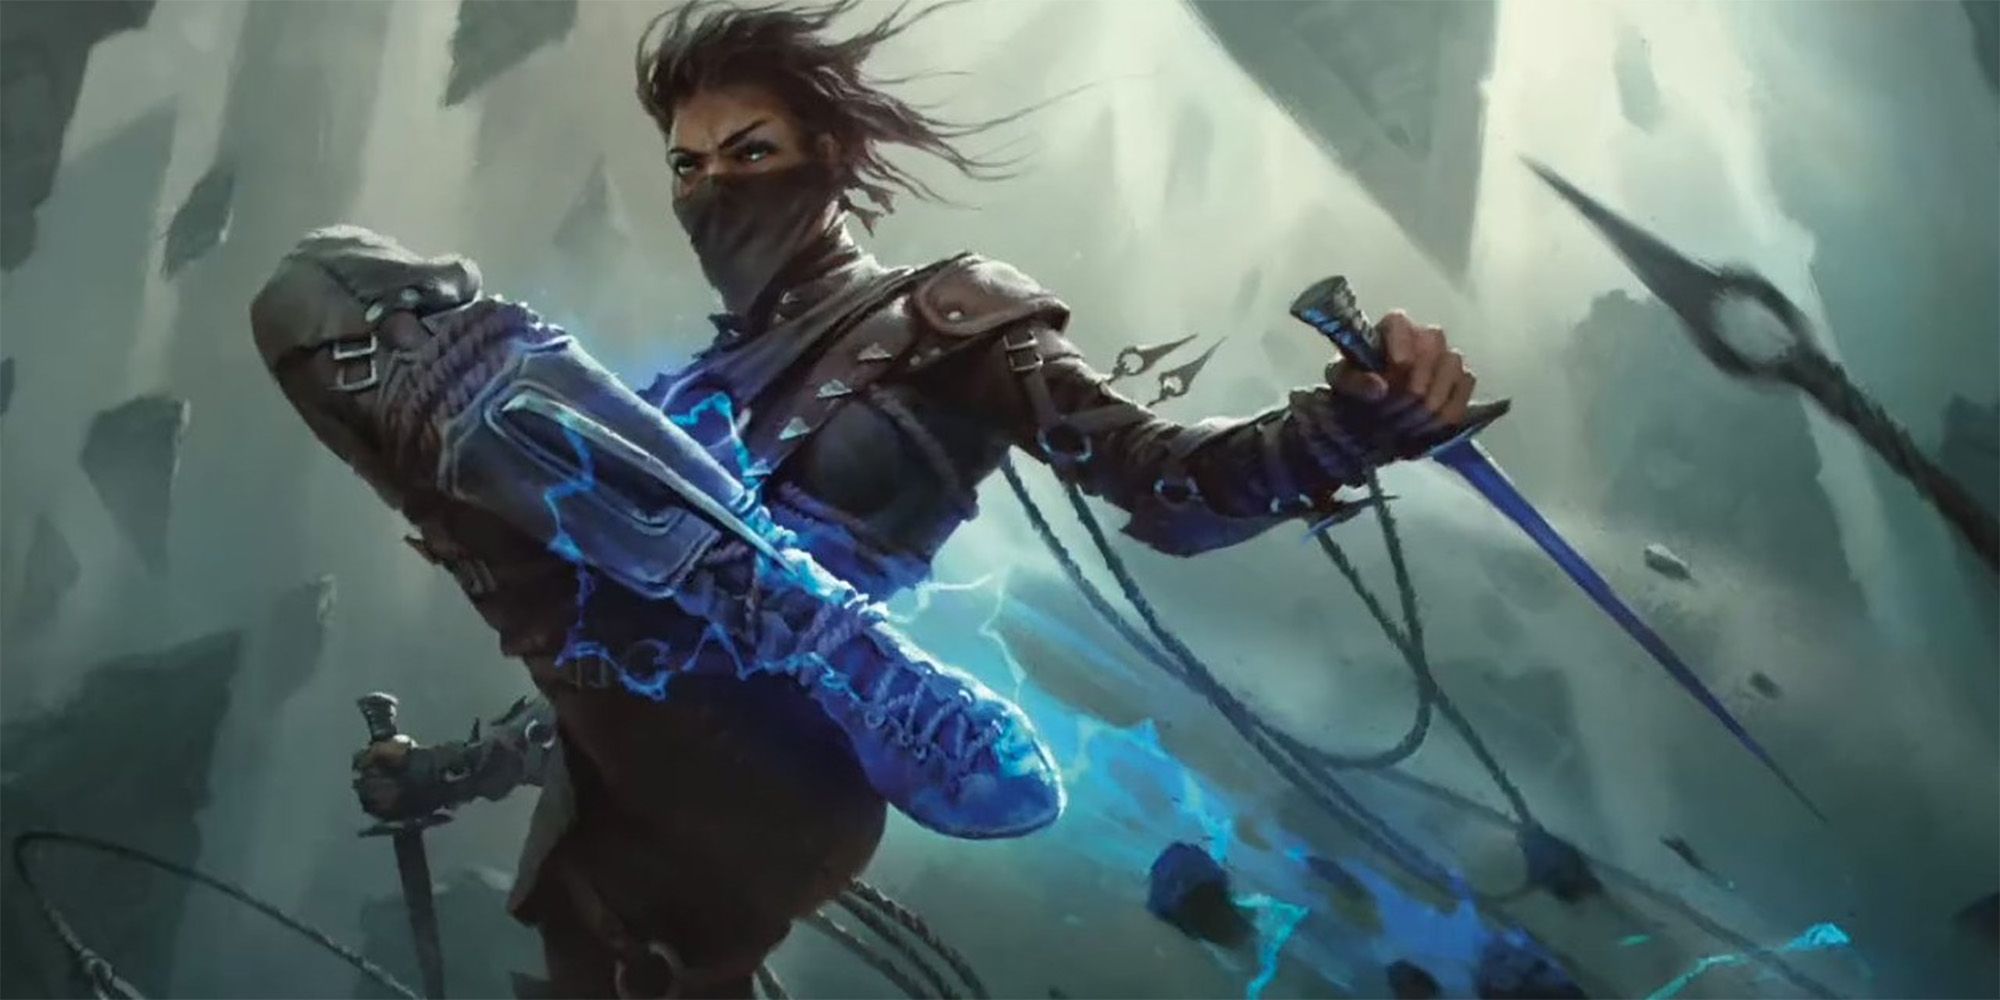 The Soulknife Roguish Archetype relies on magic and psionics to enhance their abilities